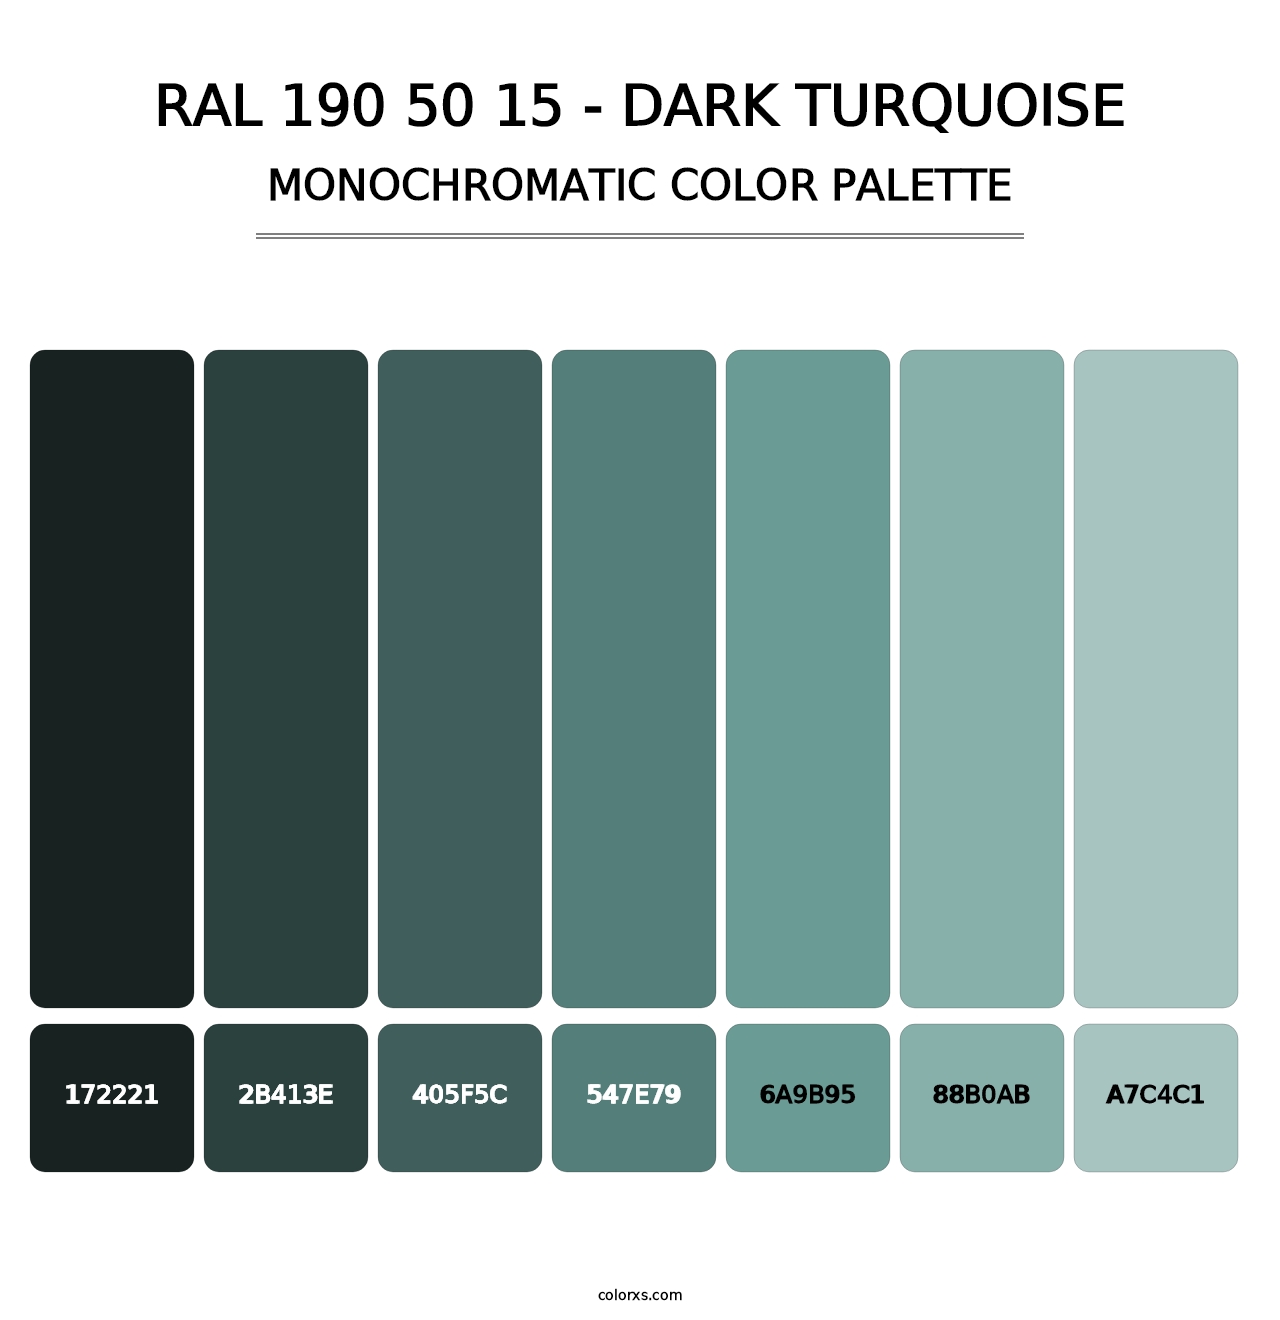 RAL 190 50 15 - Dark Turquoise - Monochromatic Color Palette